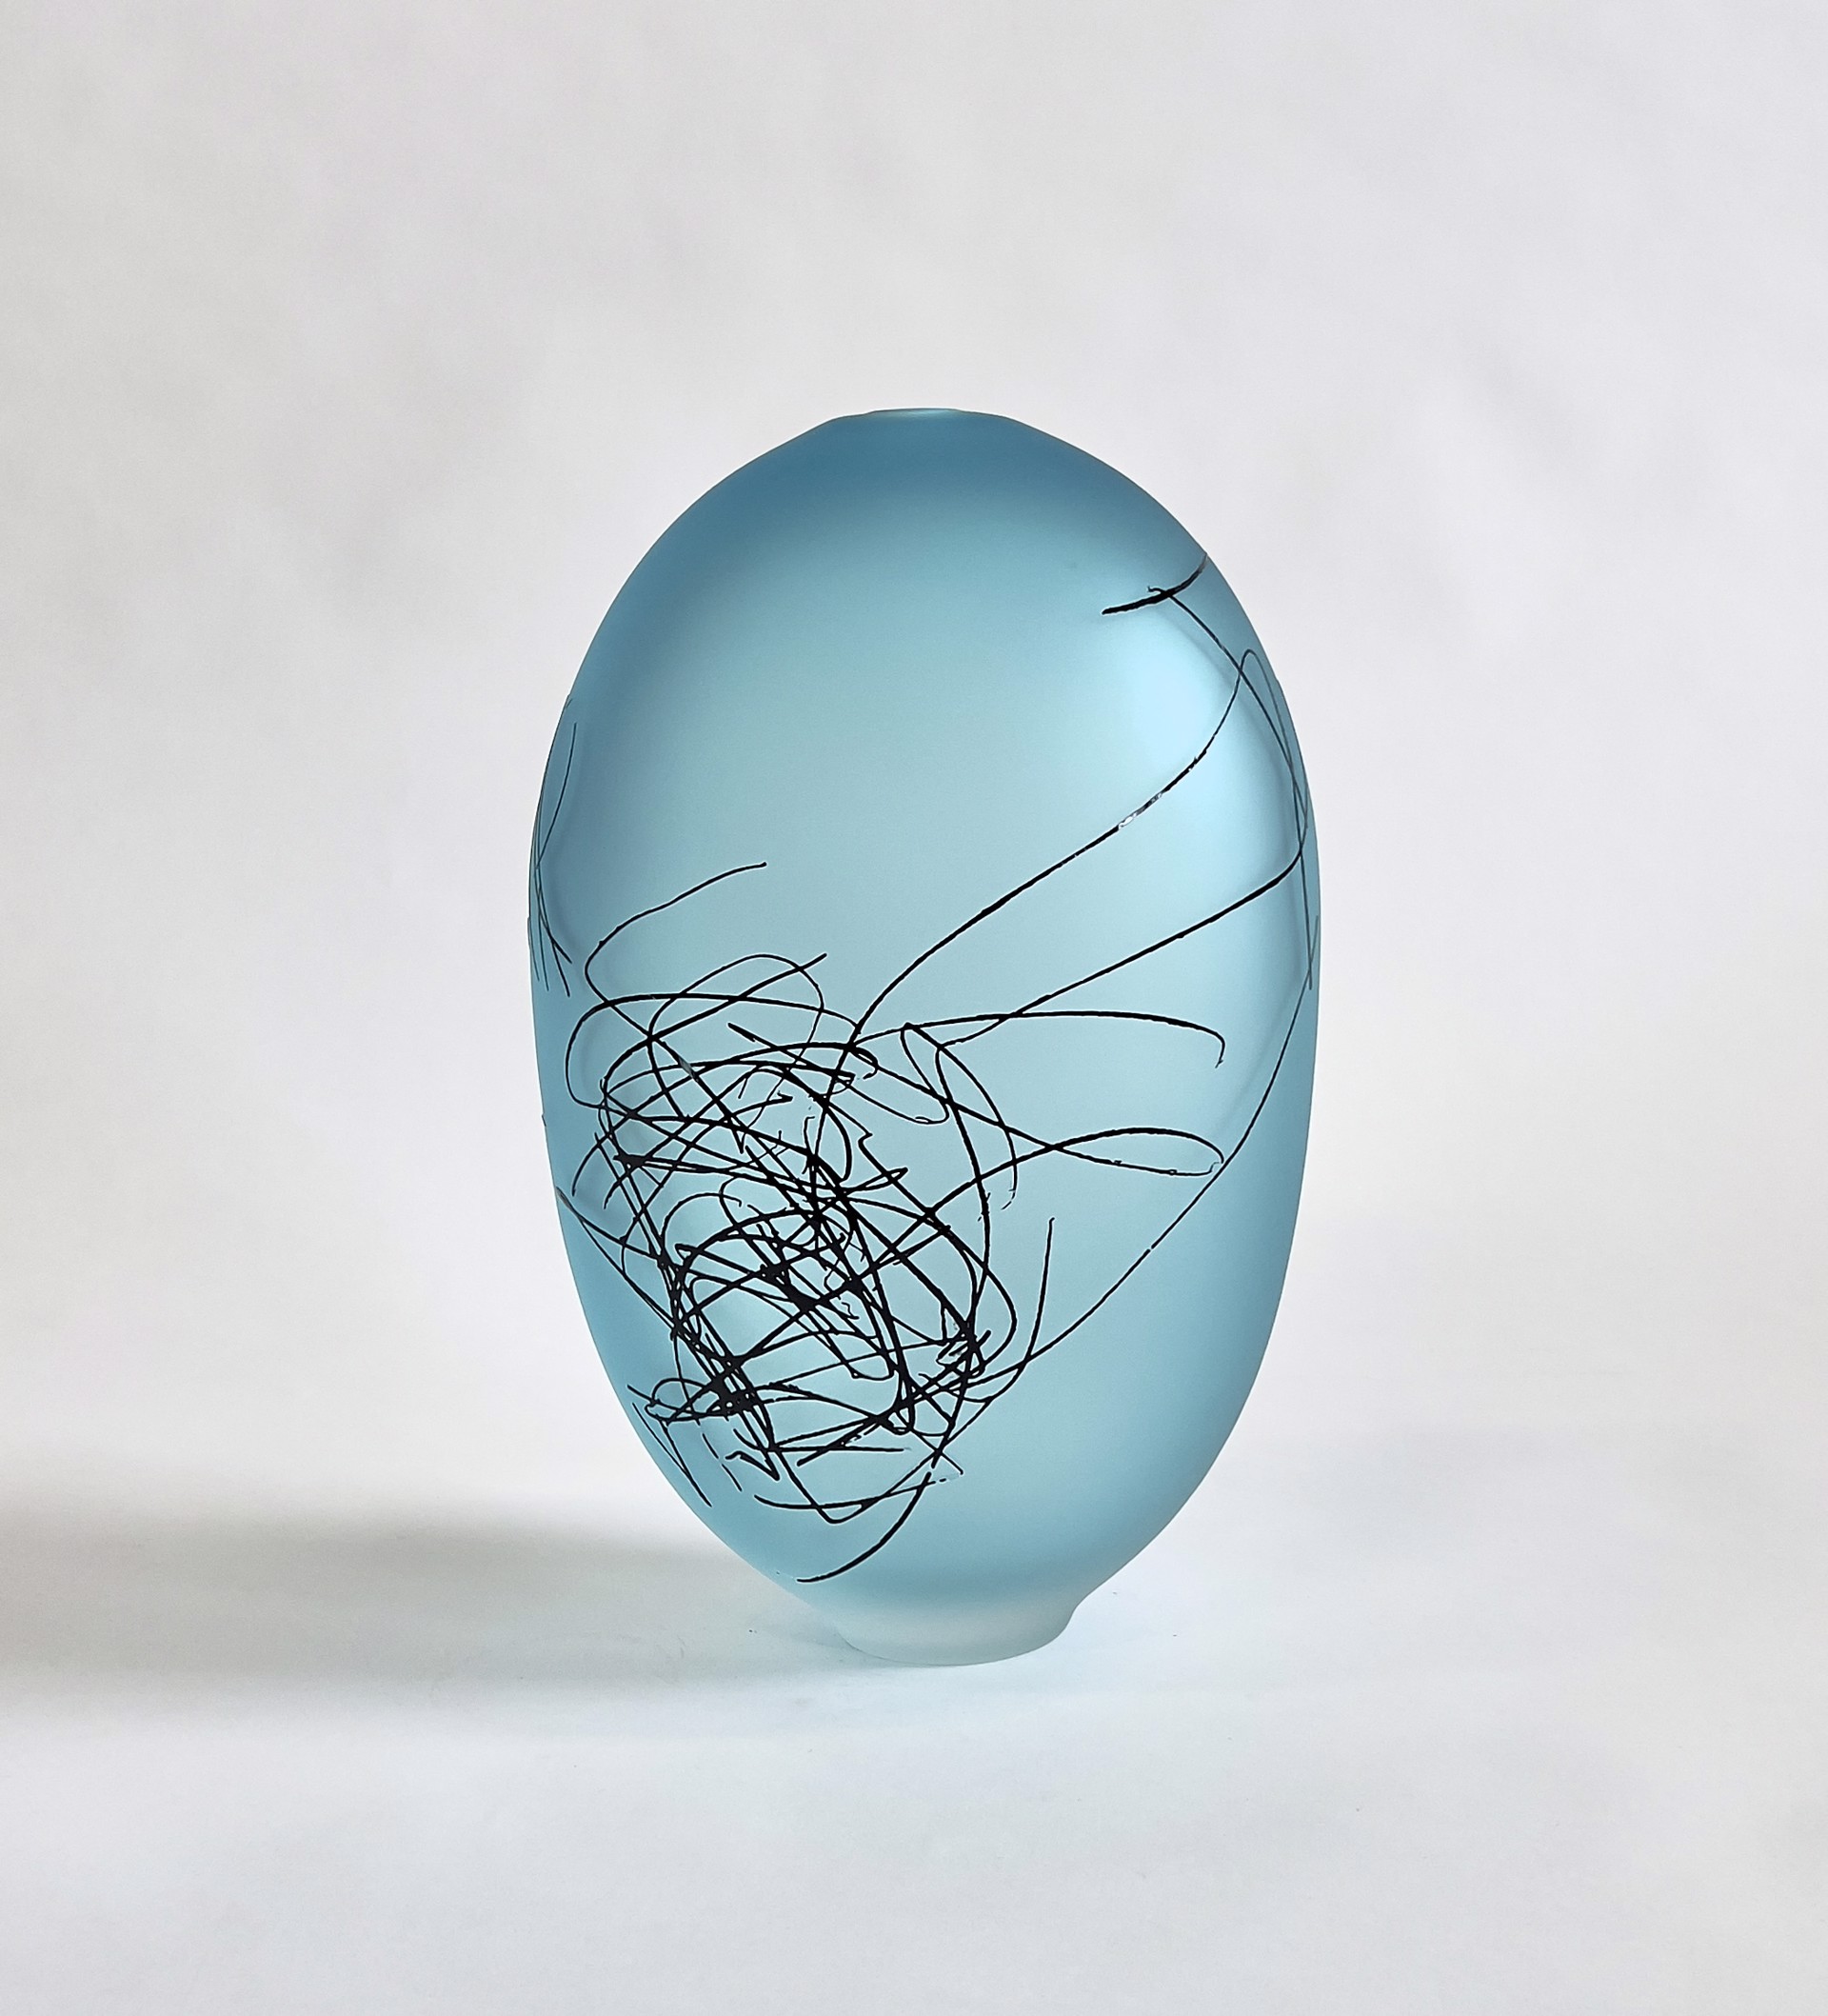 Copper Blue Scribe Ovoid by The Goodman Studios is a striking glass sculpture with a sandblasted surface, featuring intricate markings and a mesmerizing light blue hue. The abstract design invites contemplation and appreciation of the interplay between light, shadow, and form.